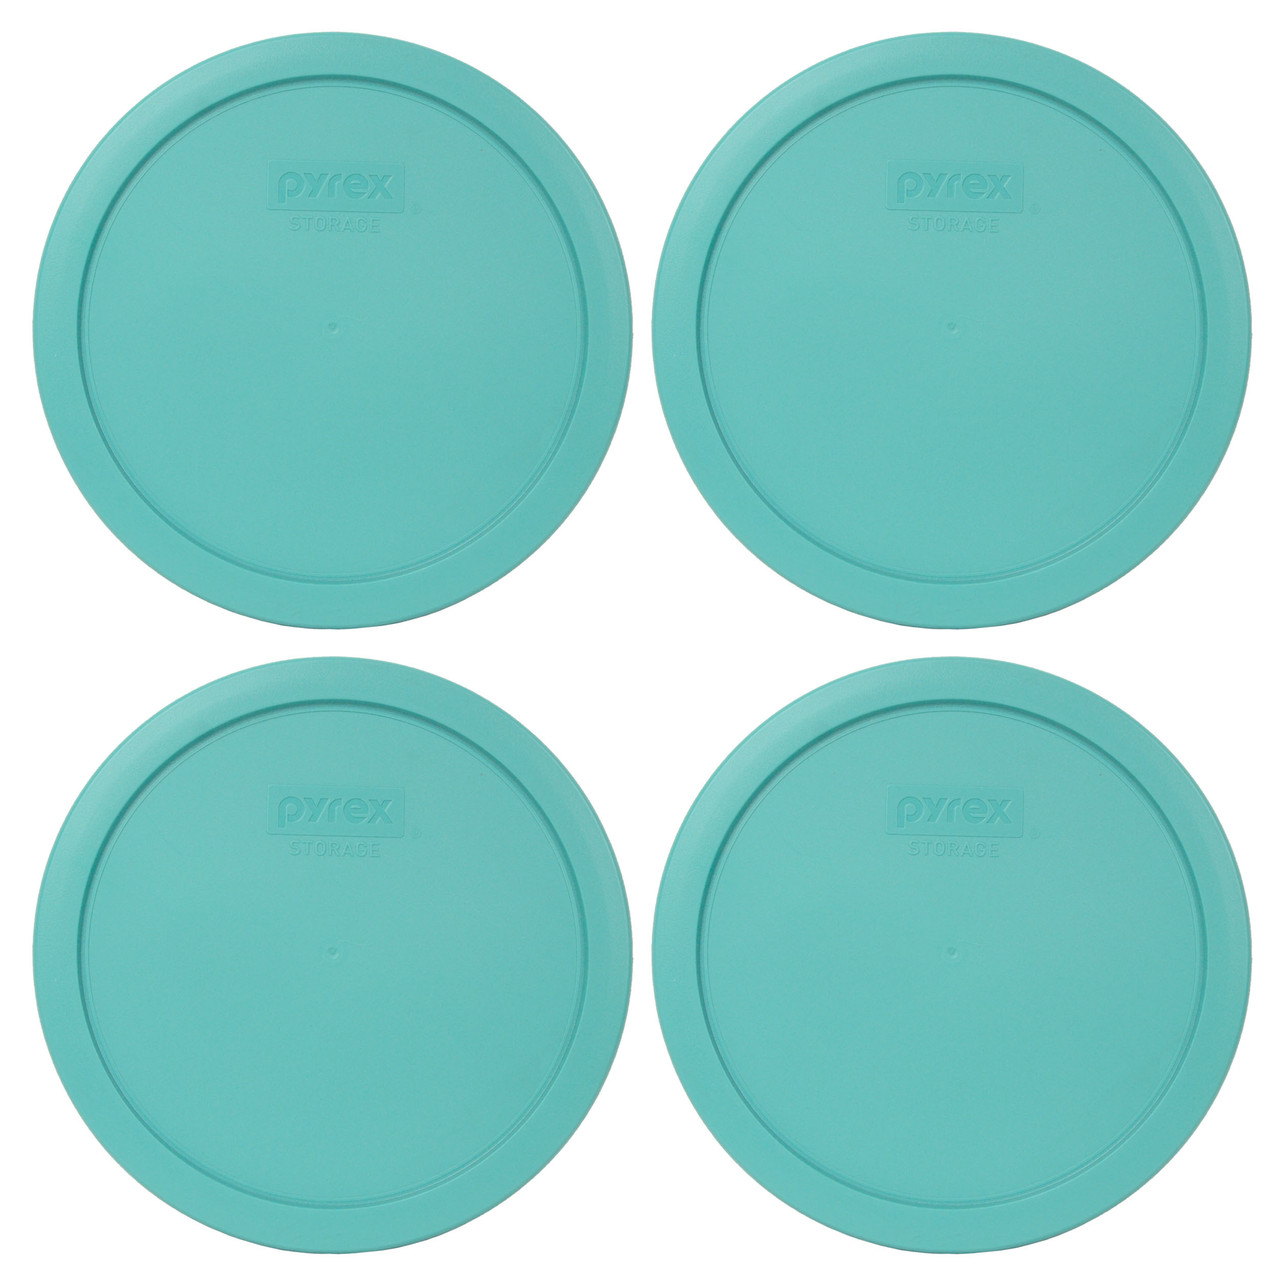 Pyrex 7203 7-Cup Glass Food Storage Bowls w/ 7402-PC 7-Cup Turquoise Lid Covers